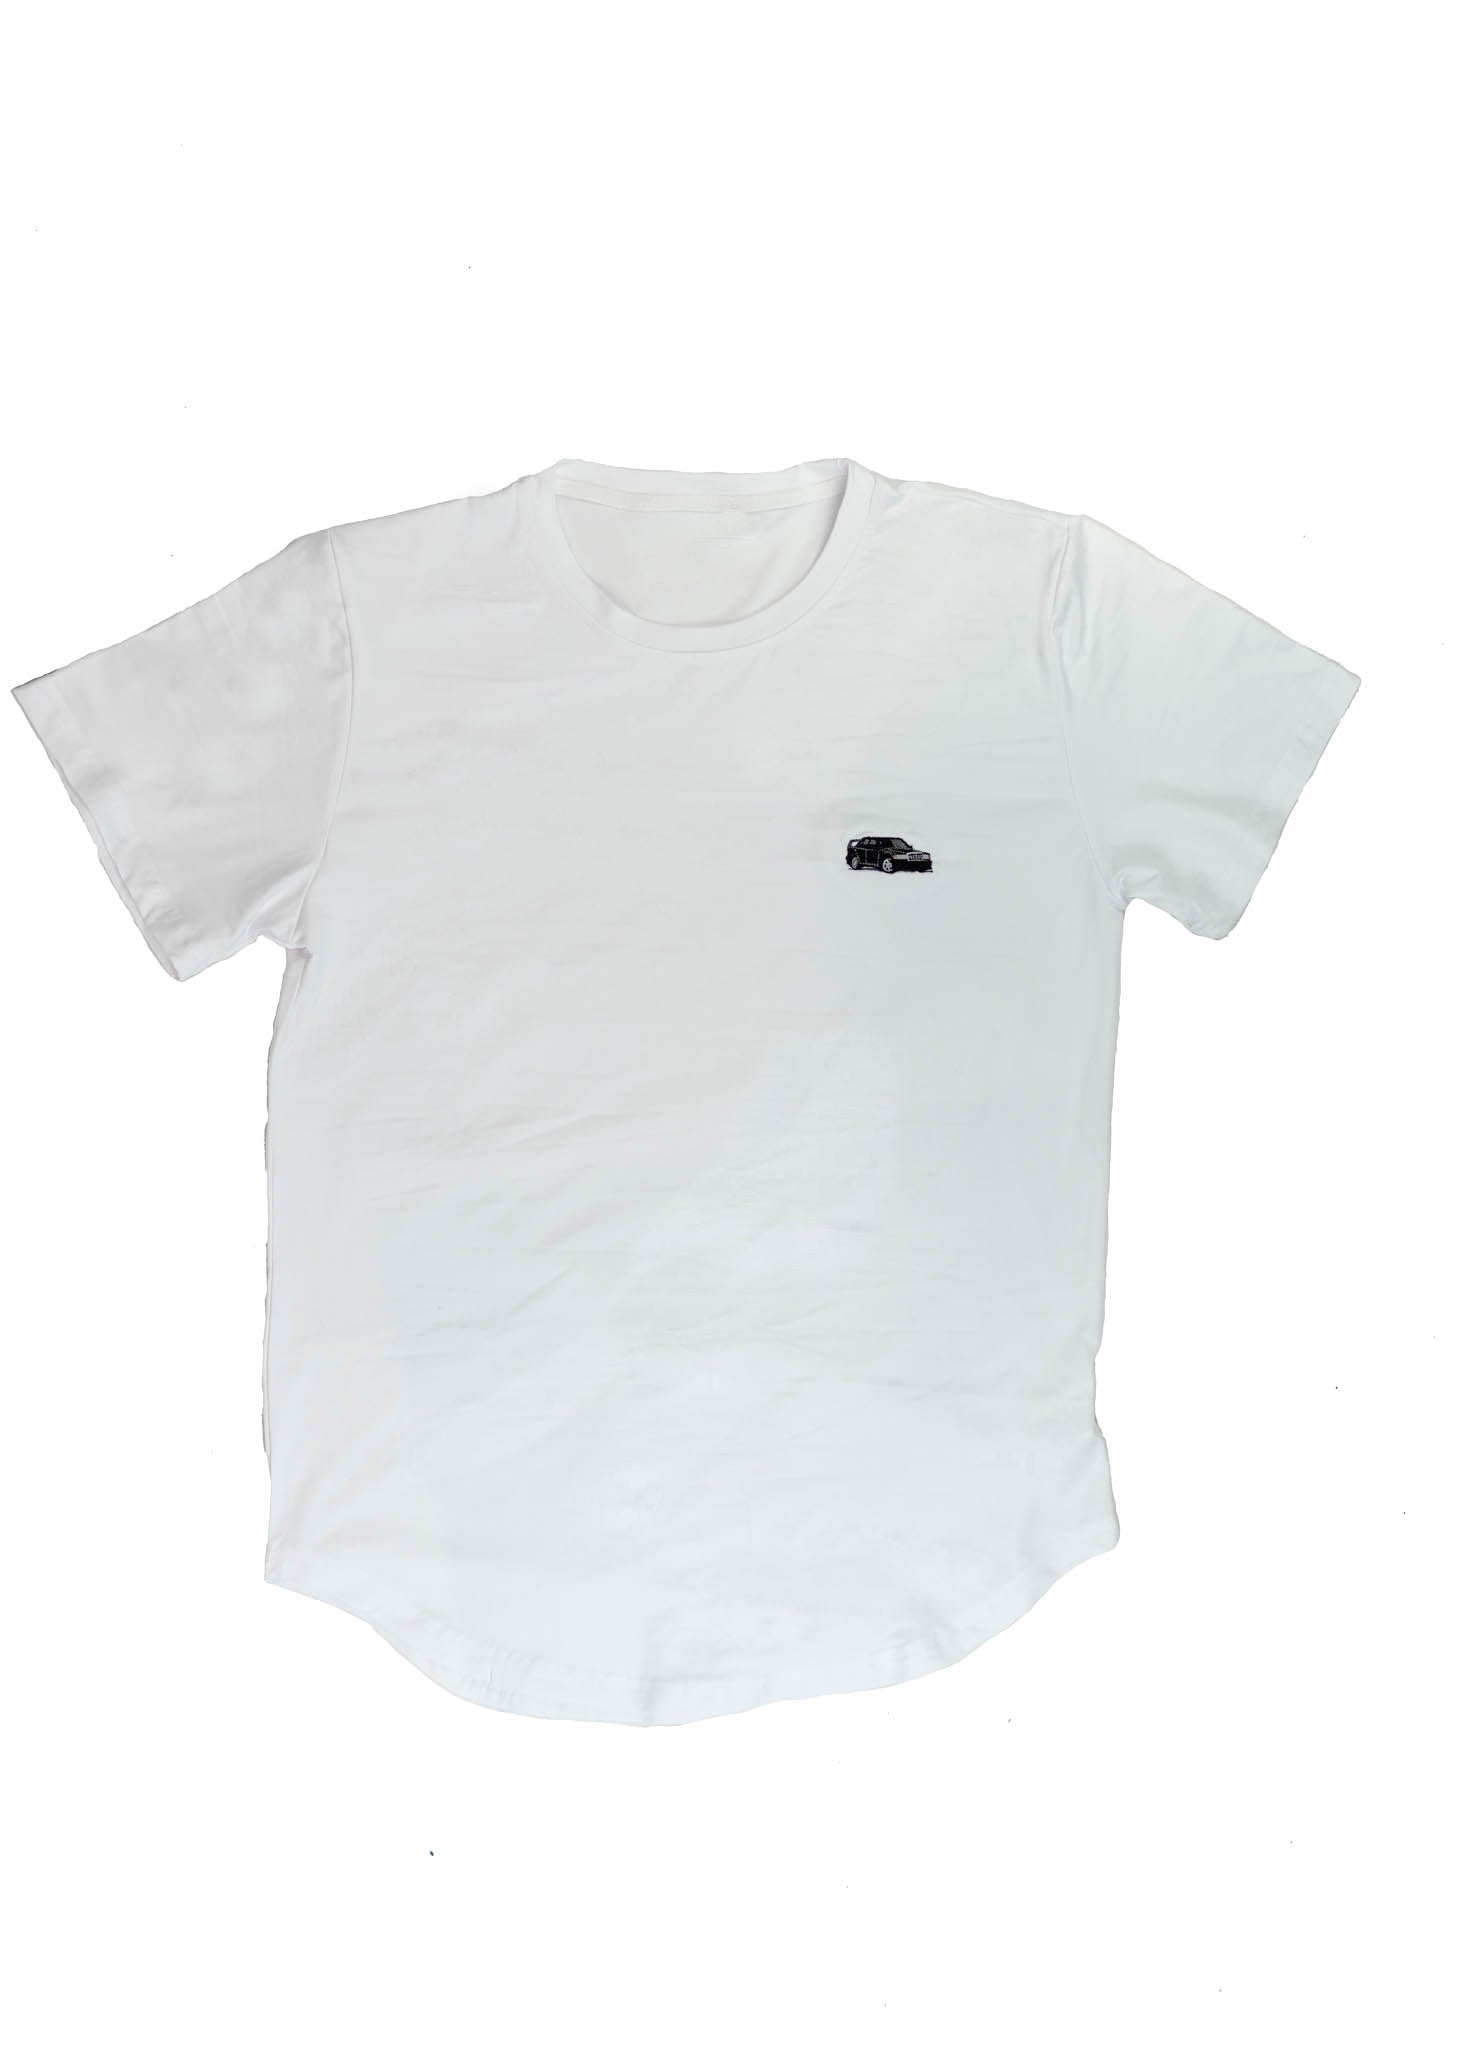 A white Mercedes-Benz t-shirt for men. Photo is the front view of the shirt with an embroidered black W201 190E 2.5-16 Evo II. Fabric composition is a polyester, and cotton mix. The material is very soft, stretchy, non-transparent. The style of this shirt is short sleeve, with a crewneck neckline.